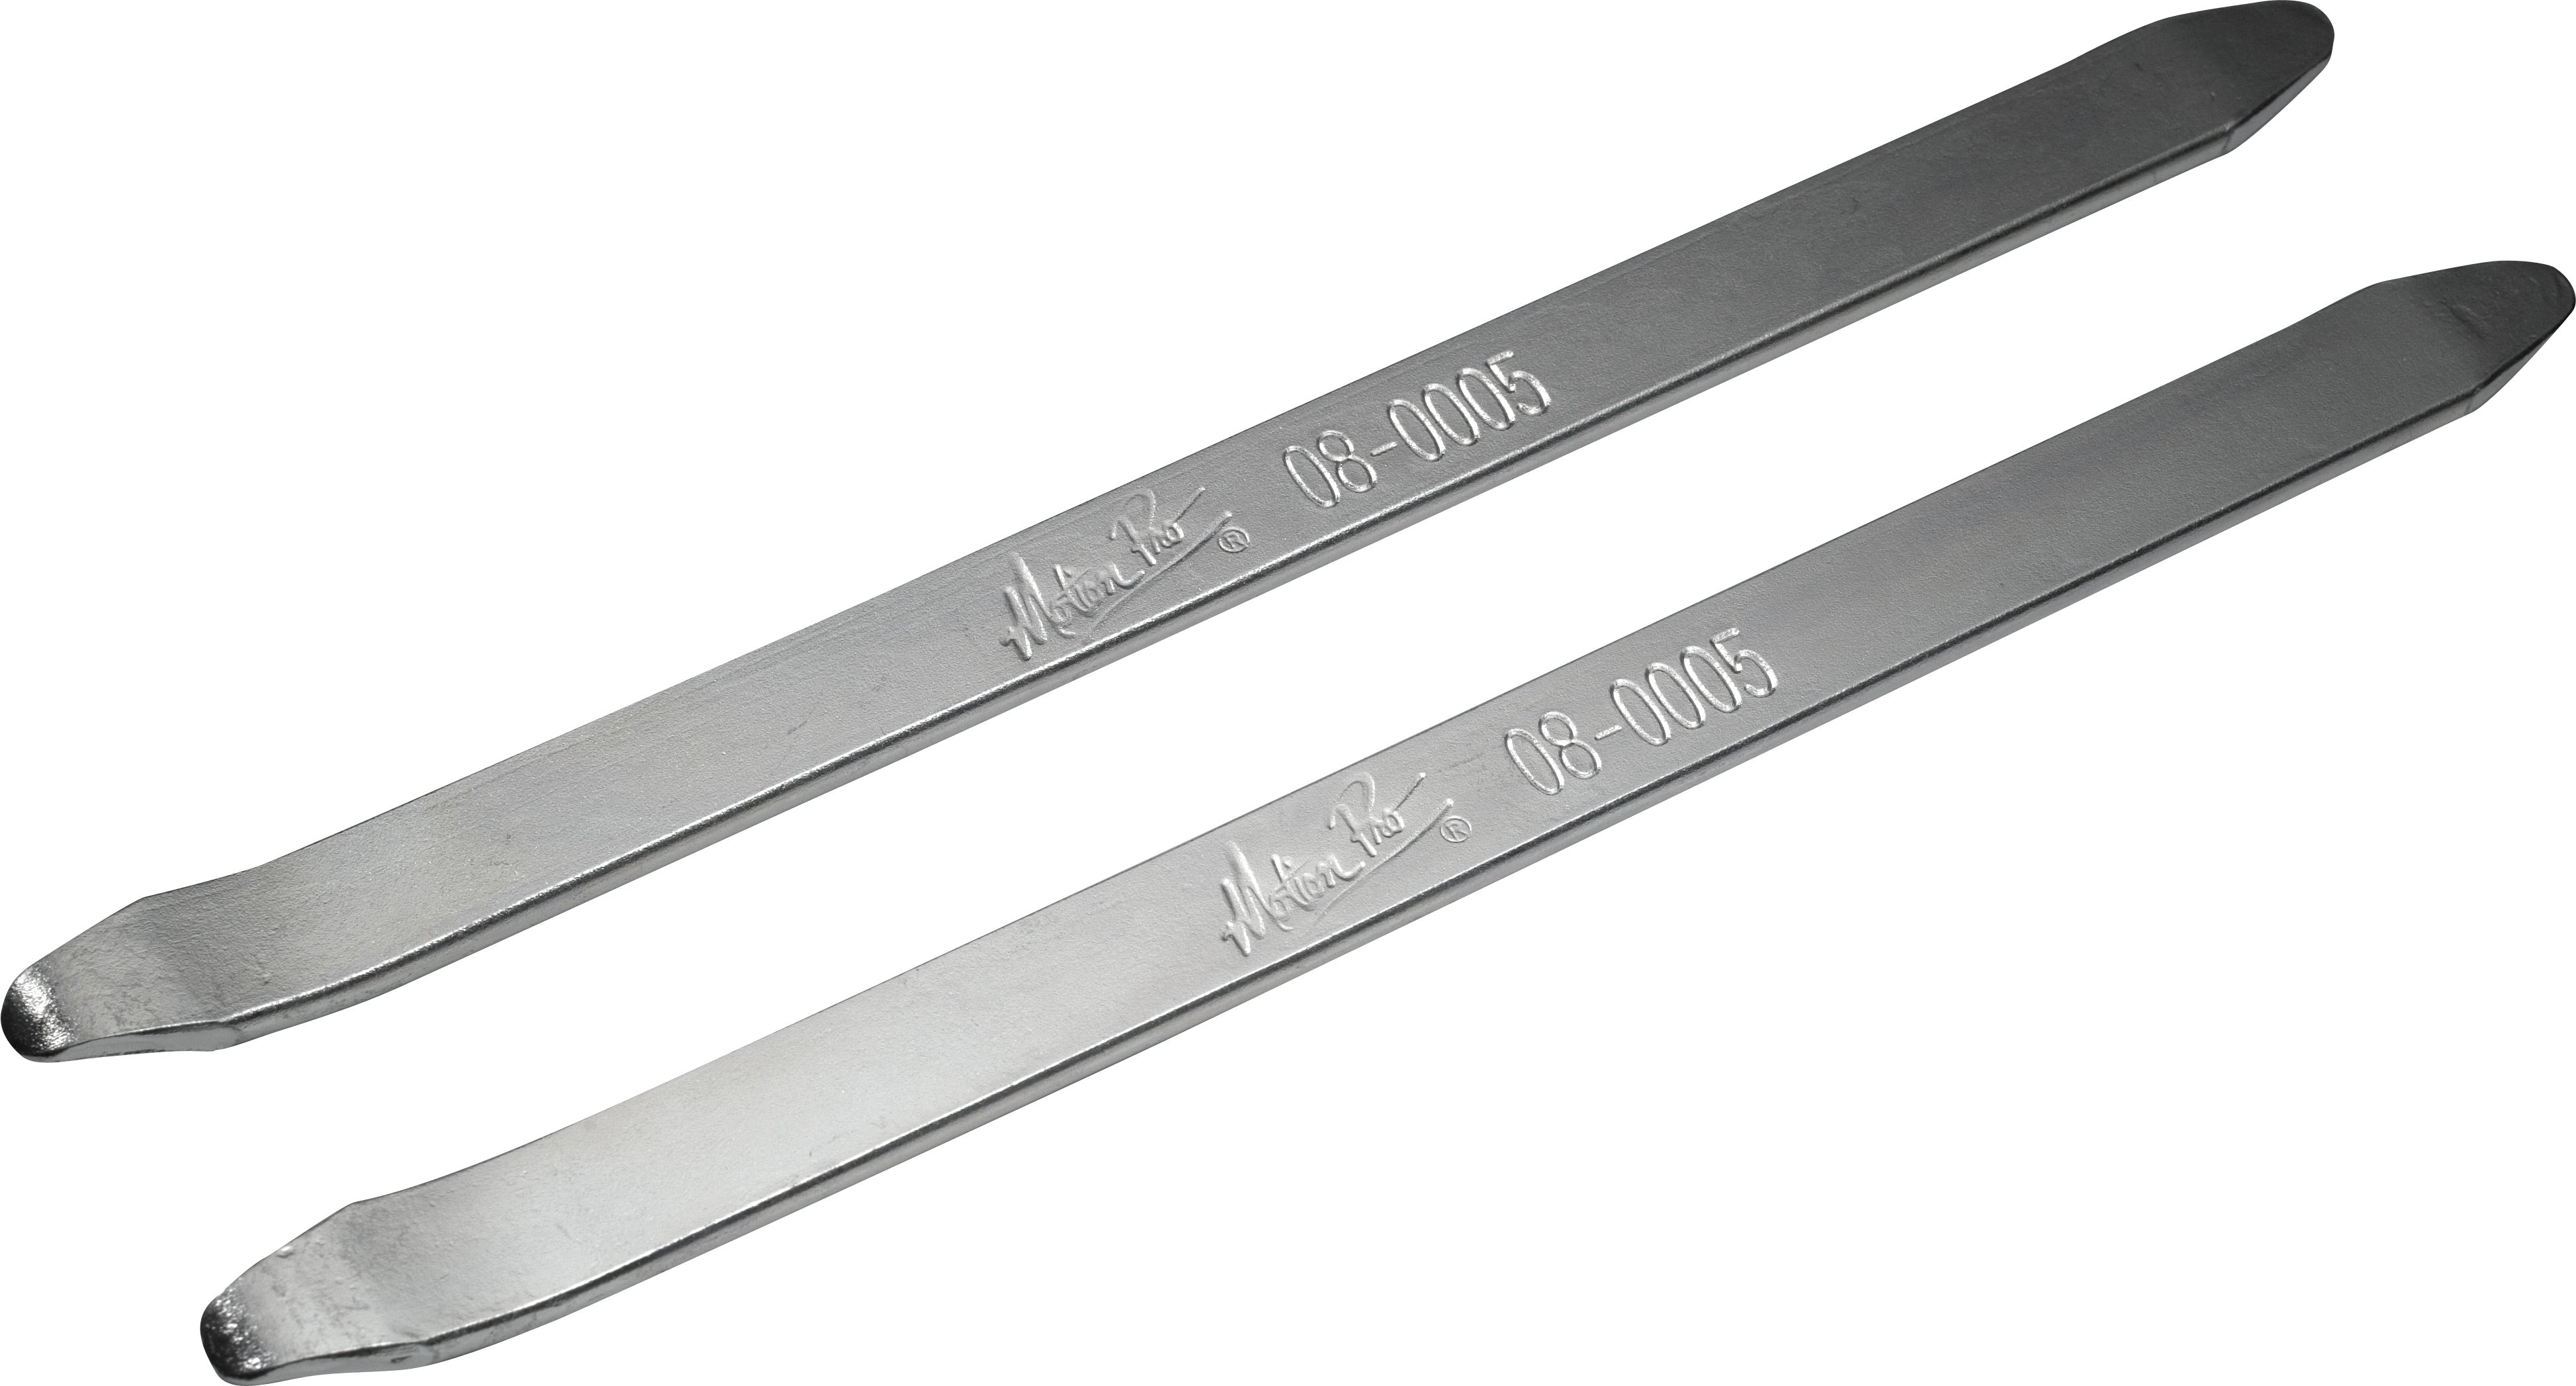 Two 11 inch steel tyre irons on a white background